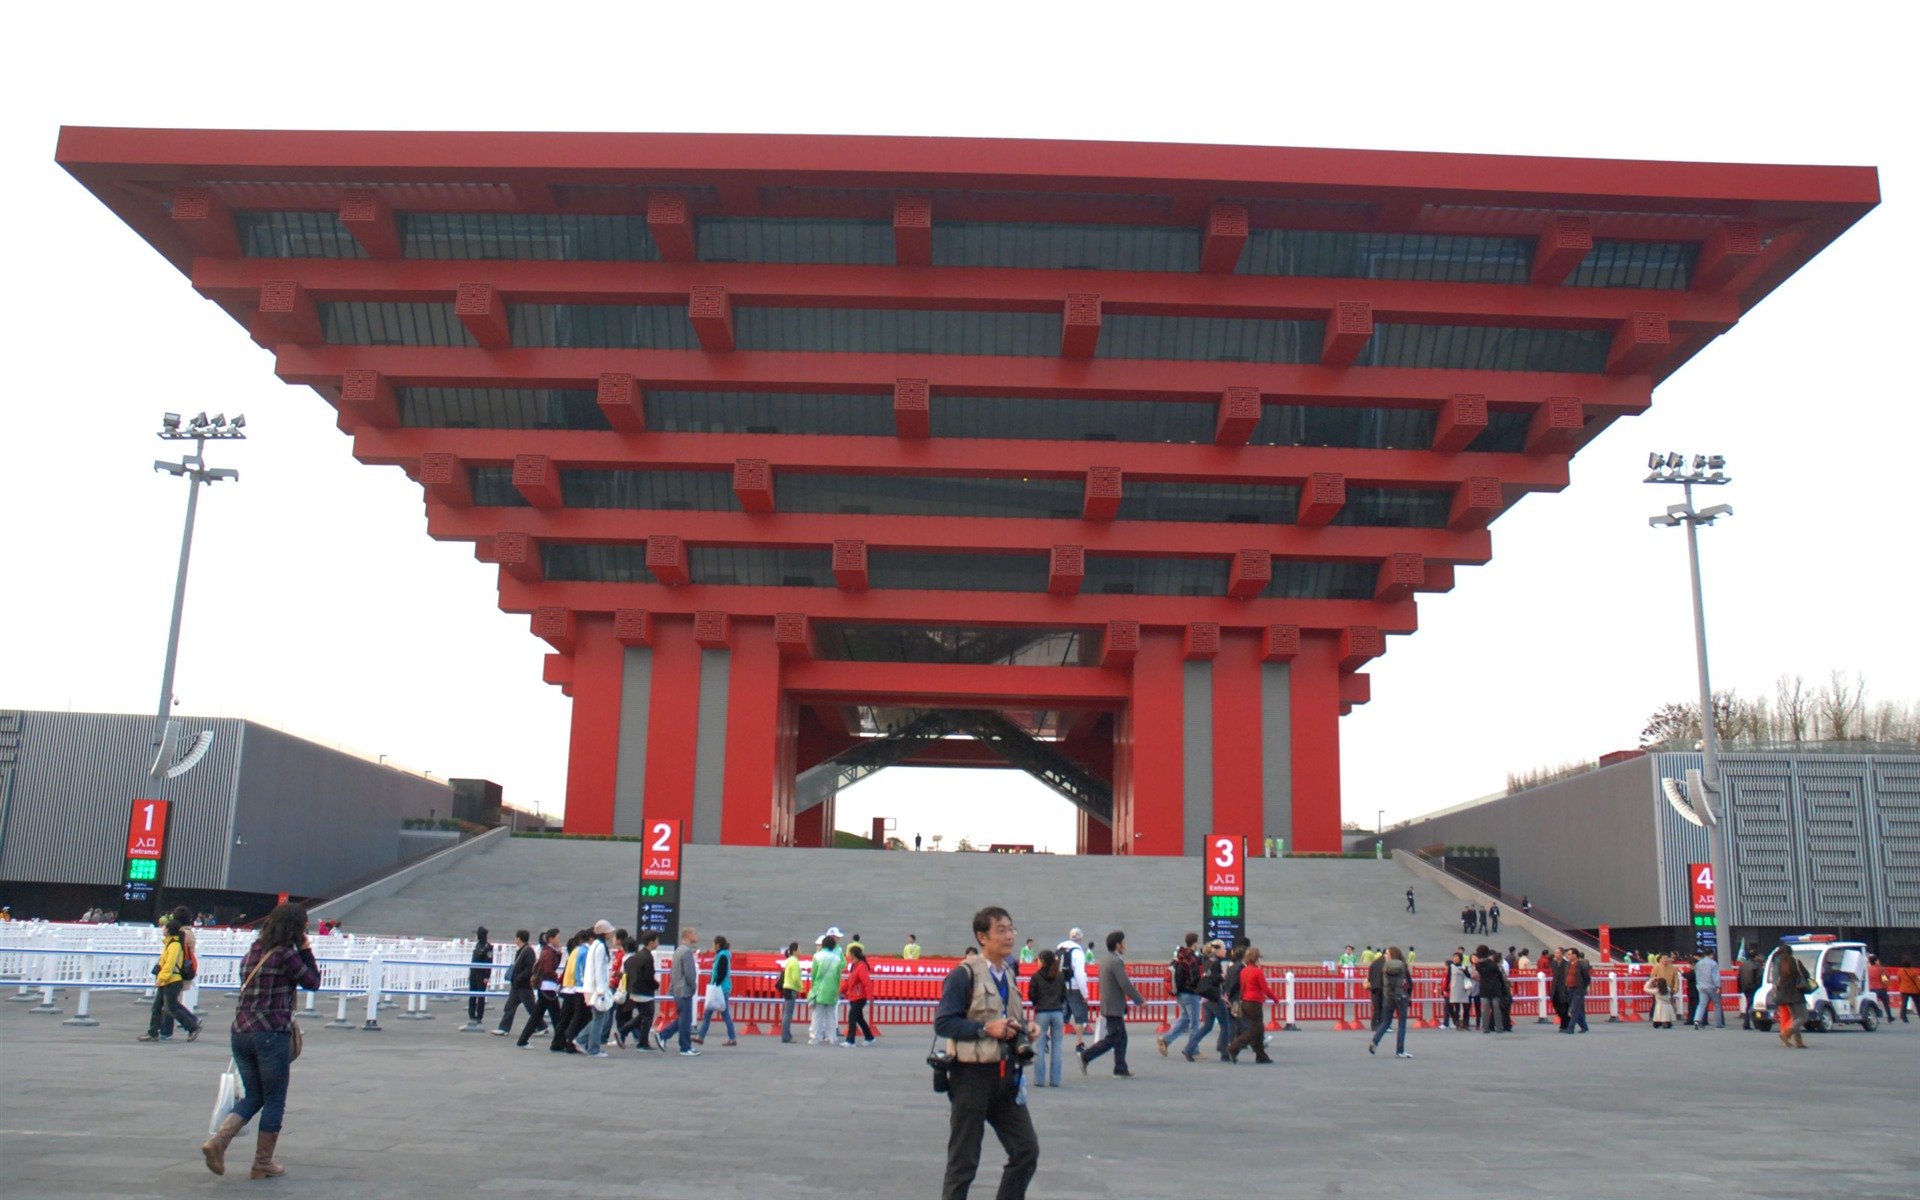 Commissioning of the 2010 Shanghai World Expo (studious works) #26 - 1920x1200